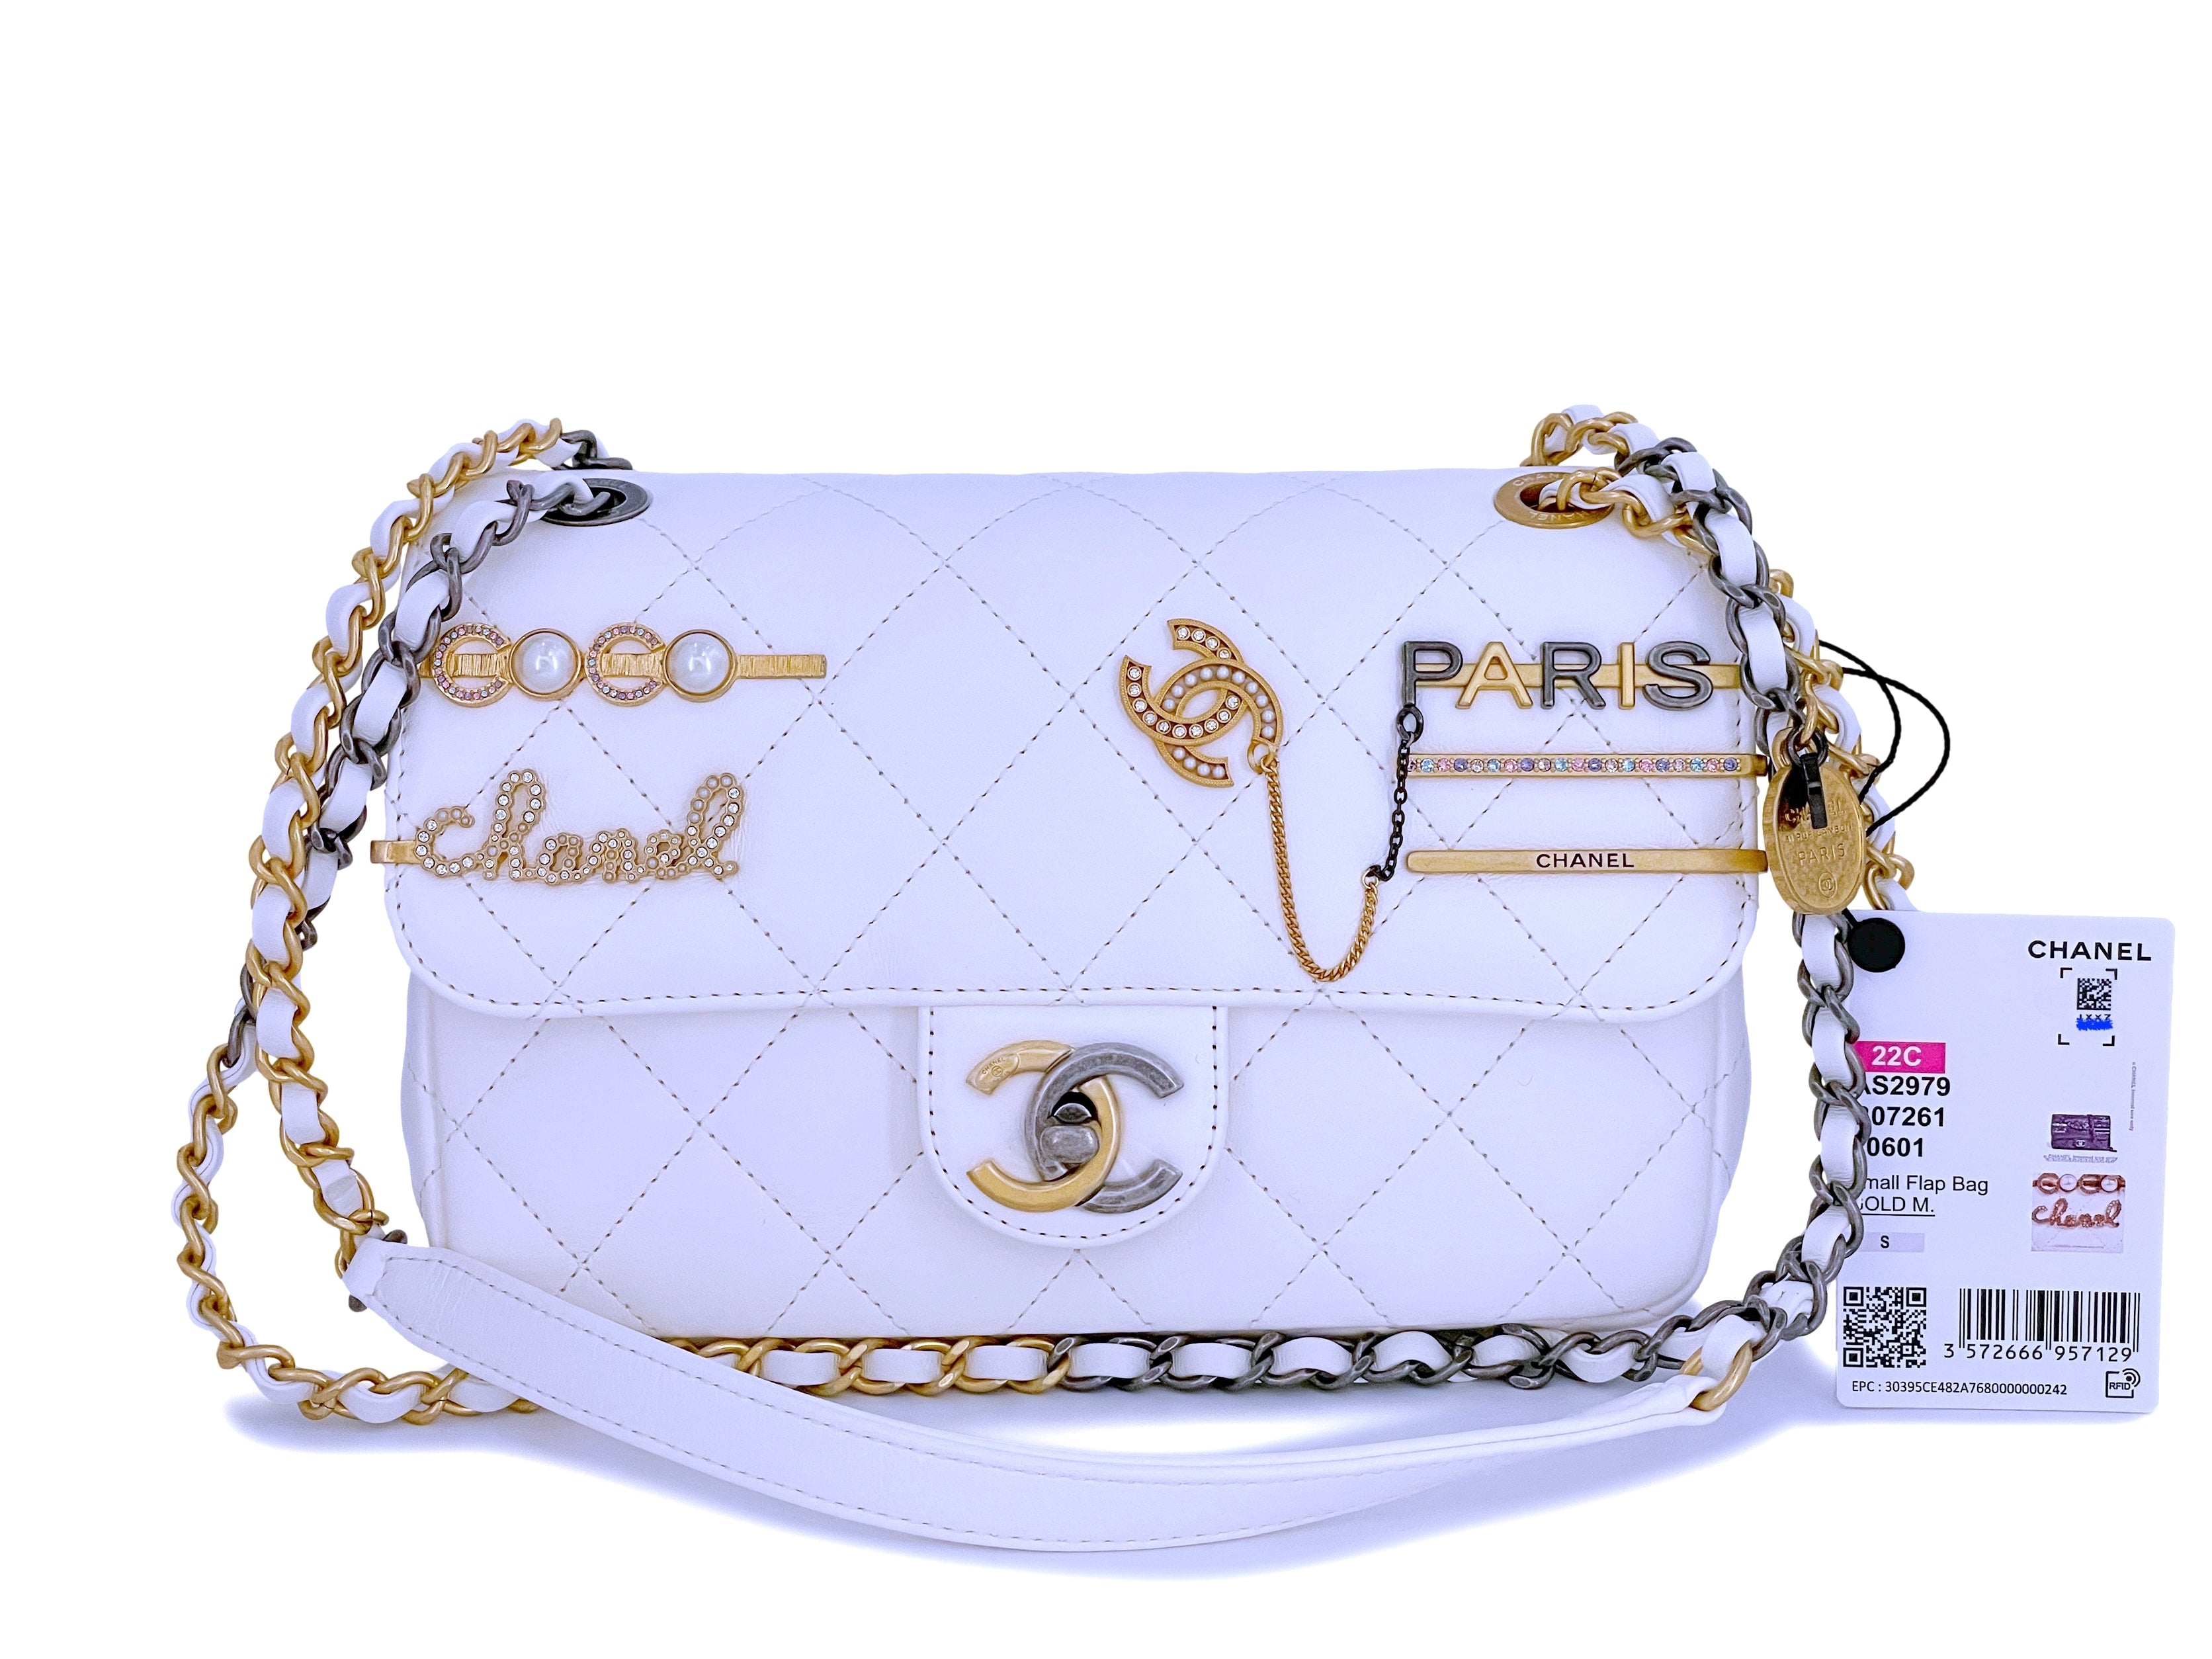 Discover the CHANEL Lambskin & Gold Metal Black & White Cruise